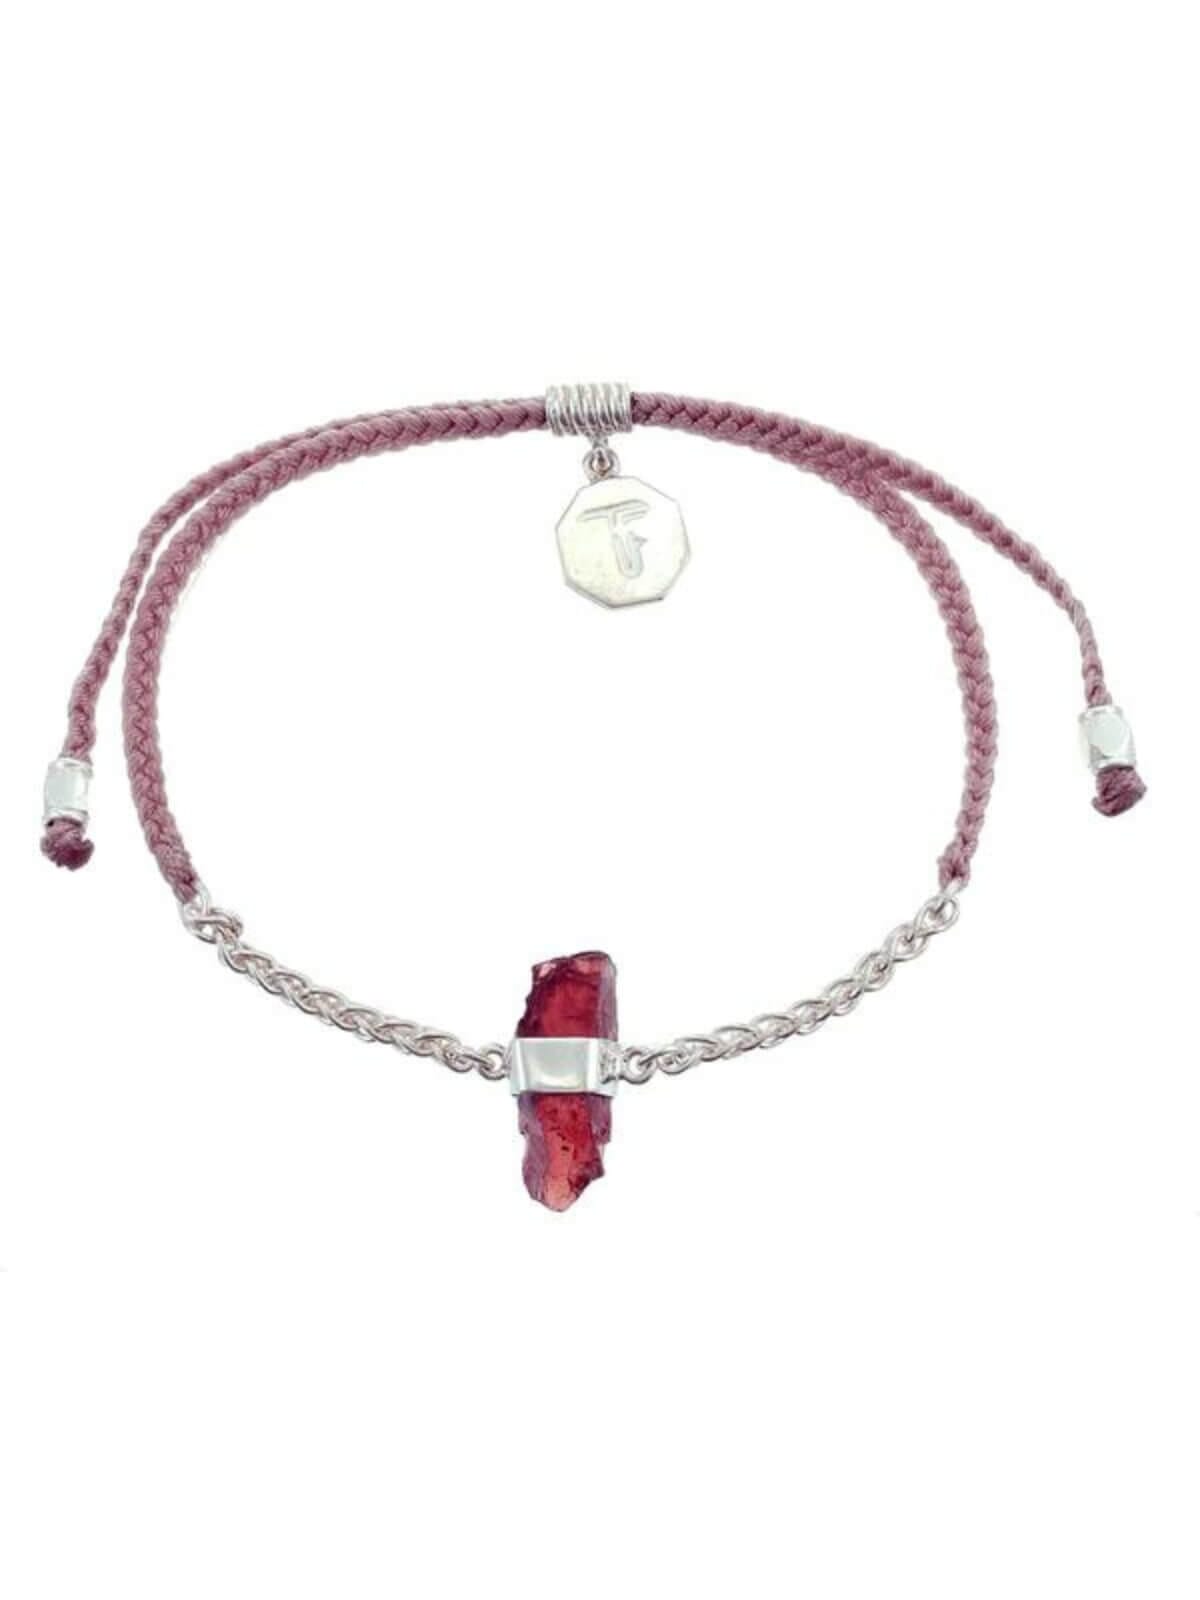 Chain And Cord Crystal Bracelet | Silver - Dusty Pink/Garnet